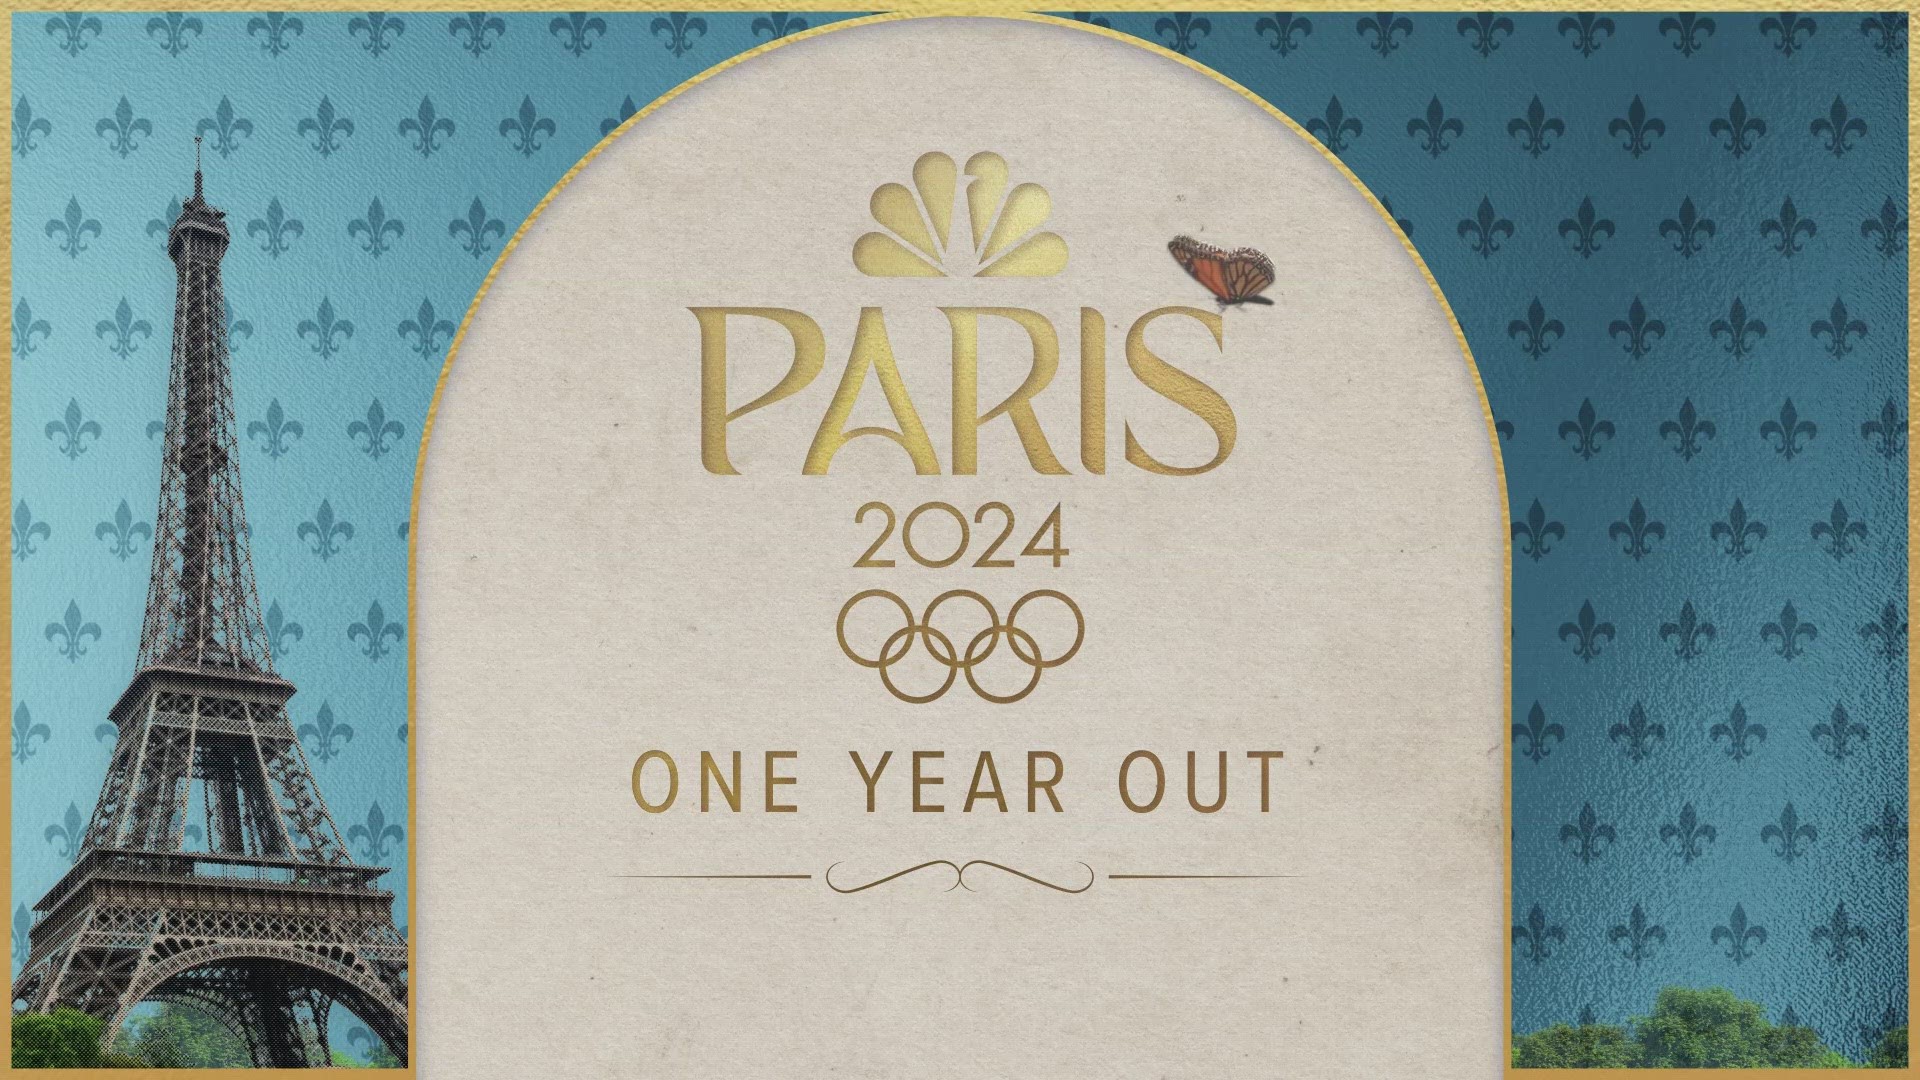 Matt Renoux gives a live preview of the preparations for the Paris Olympics.